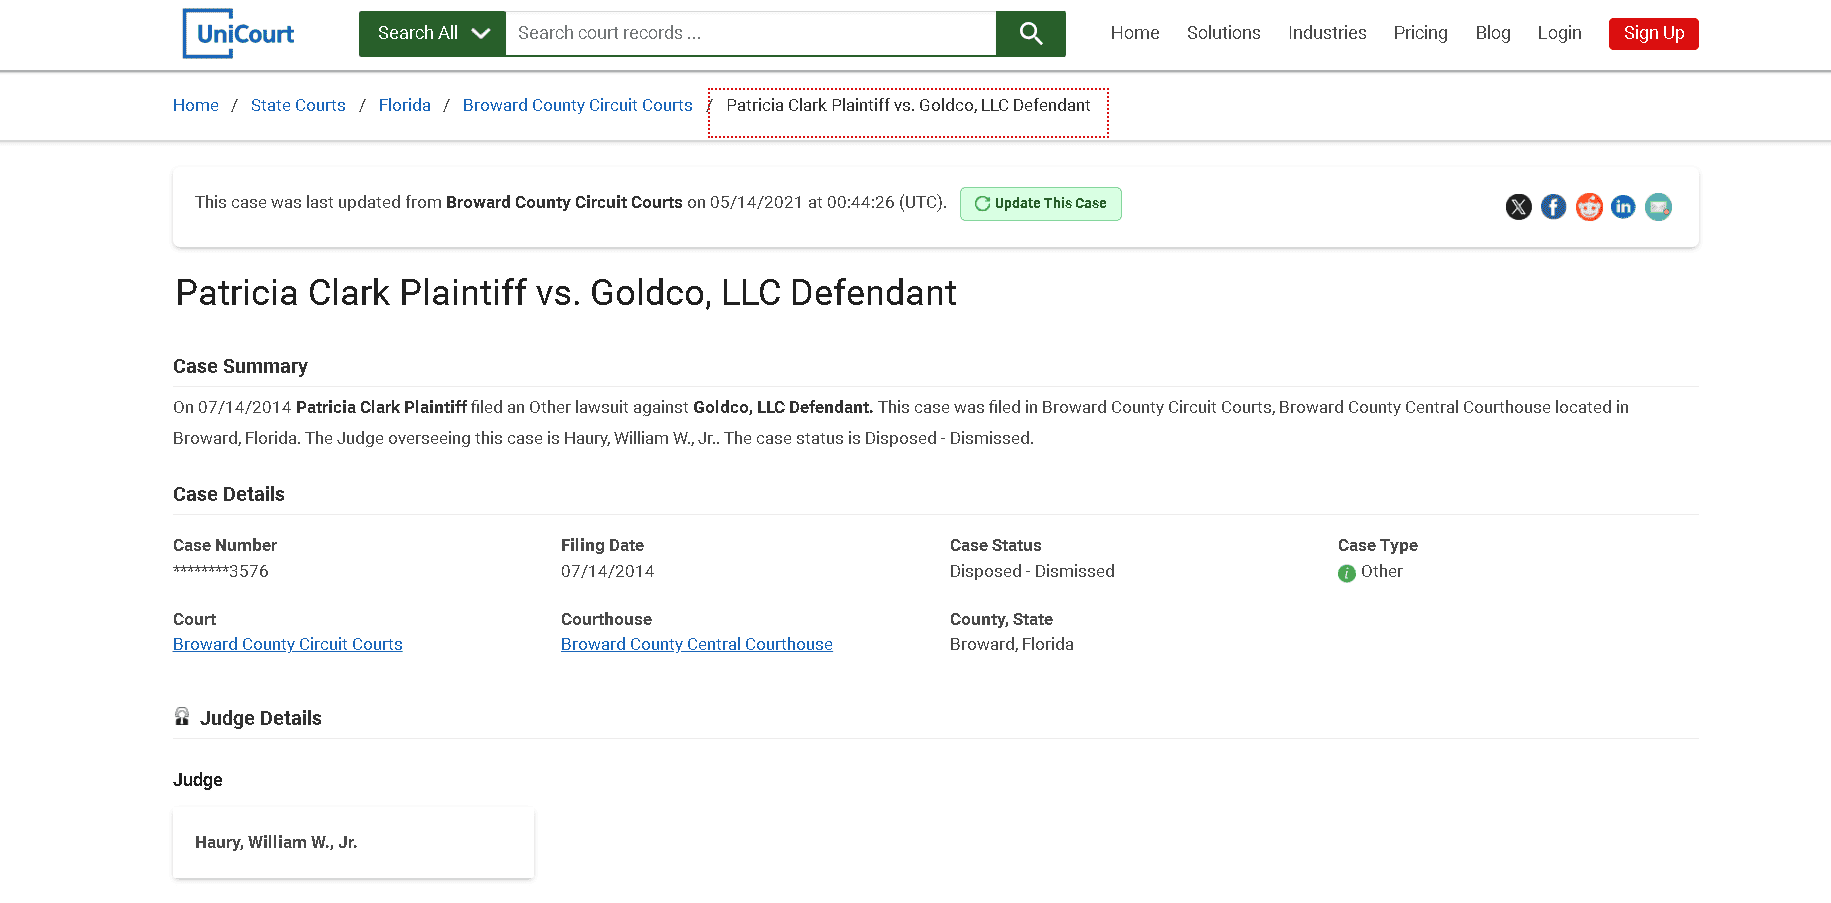 Goldco lawsuit example 3